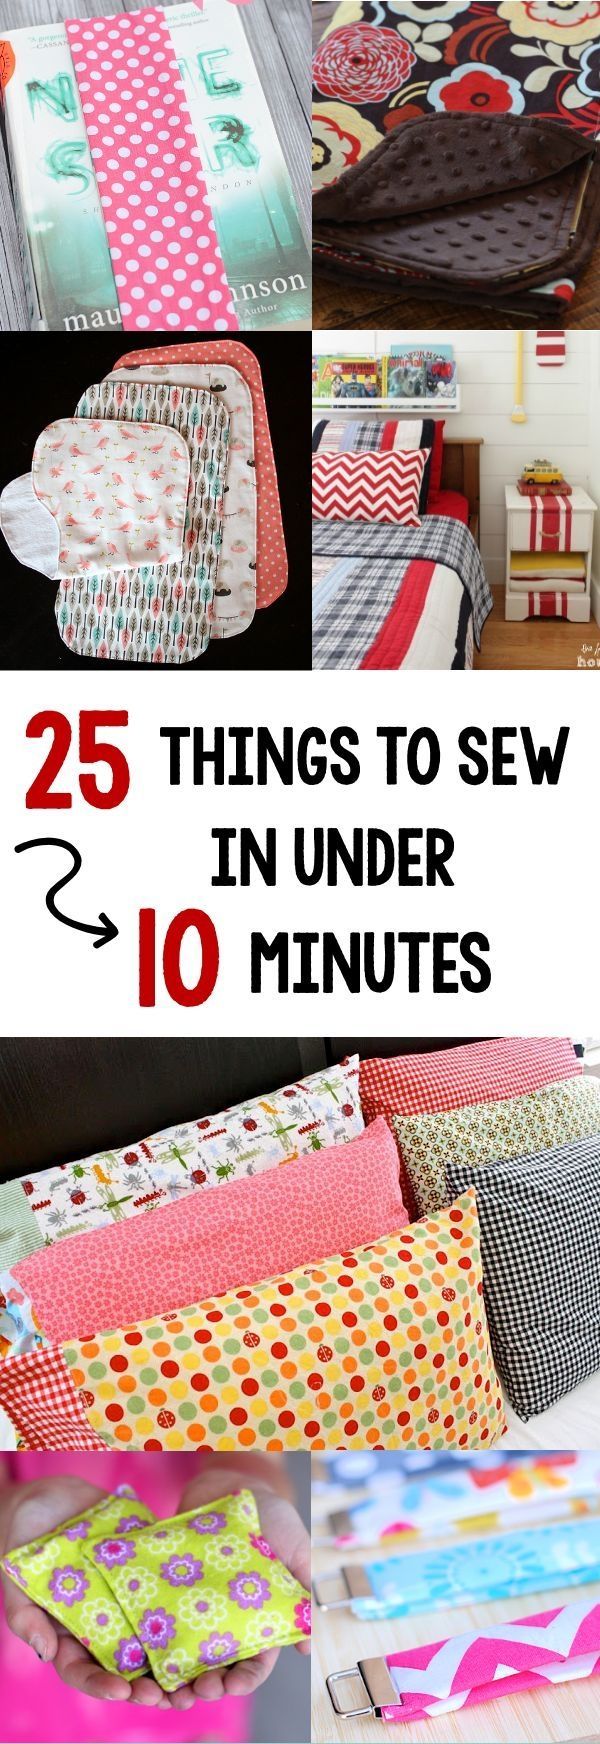 Easy Sewing Projects-25 Things to Sew in Under 10 Minutes -   24 sewing crafts to sell
 ideas